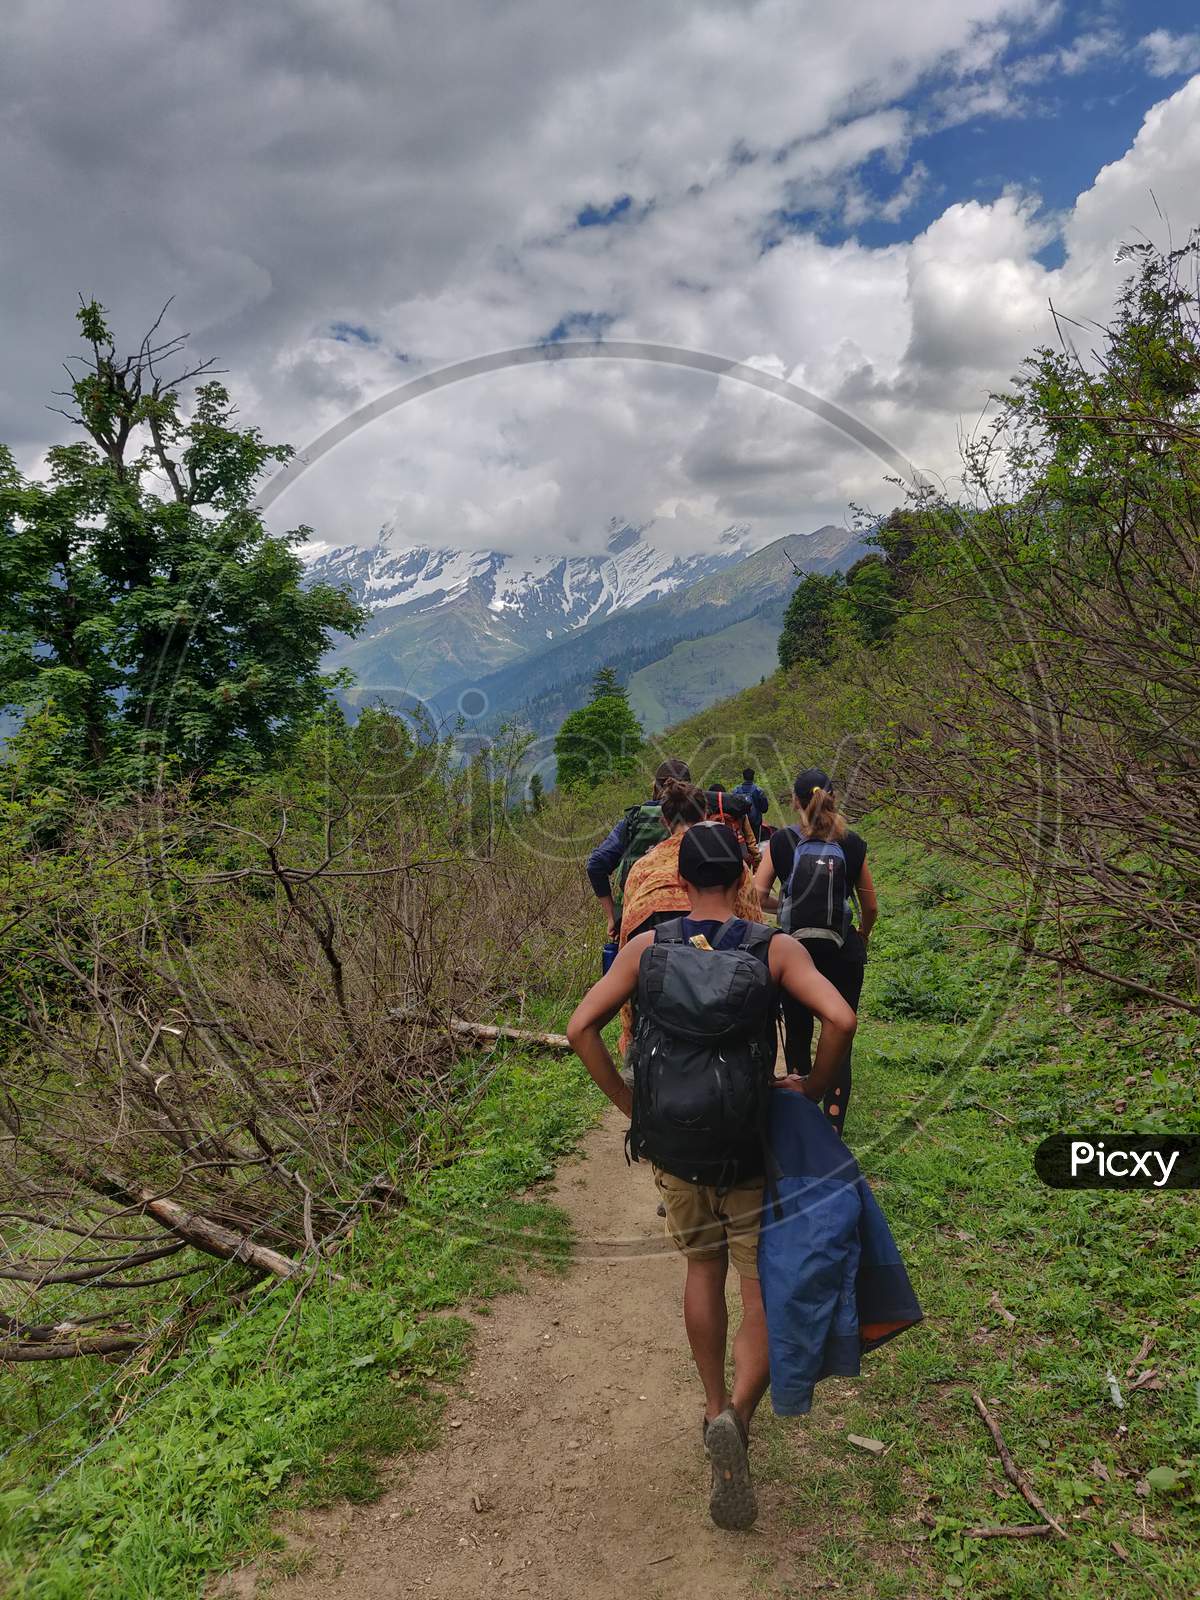 A group hiking on mountain